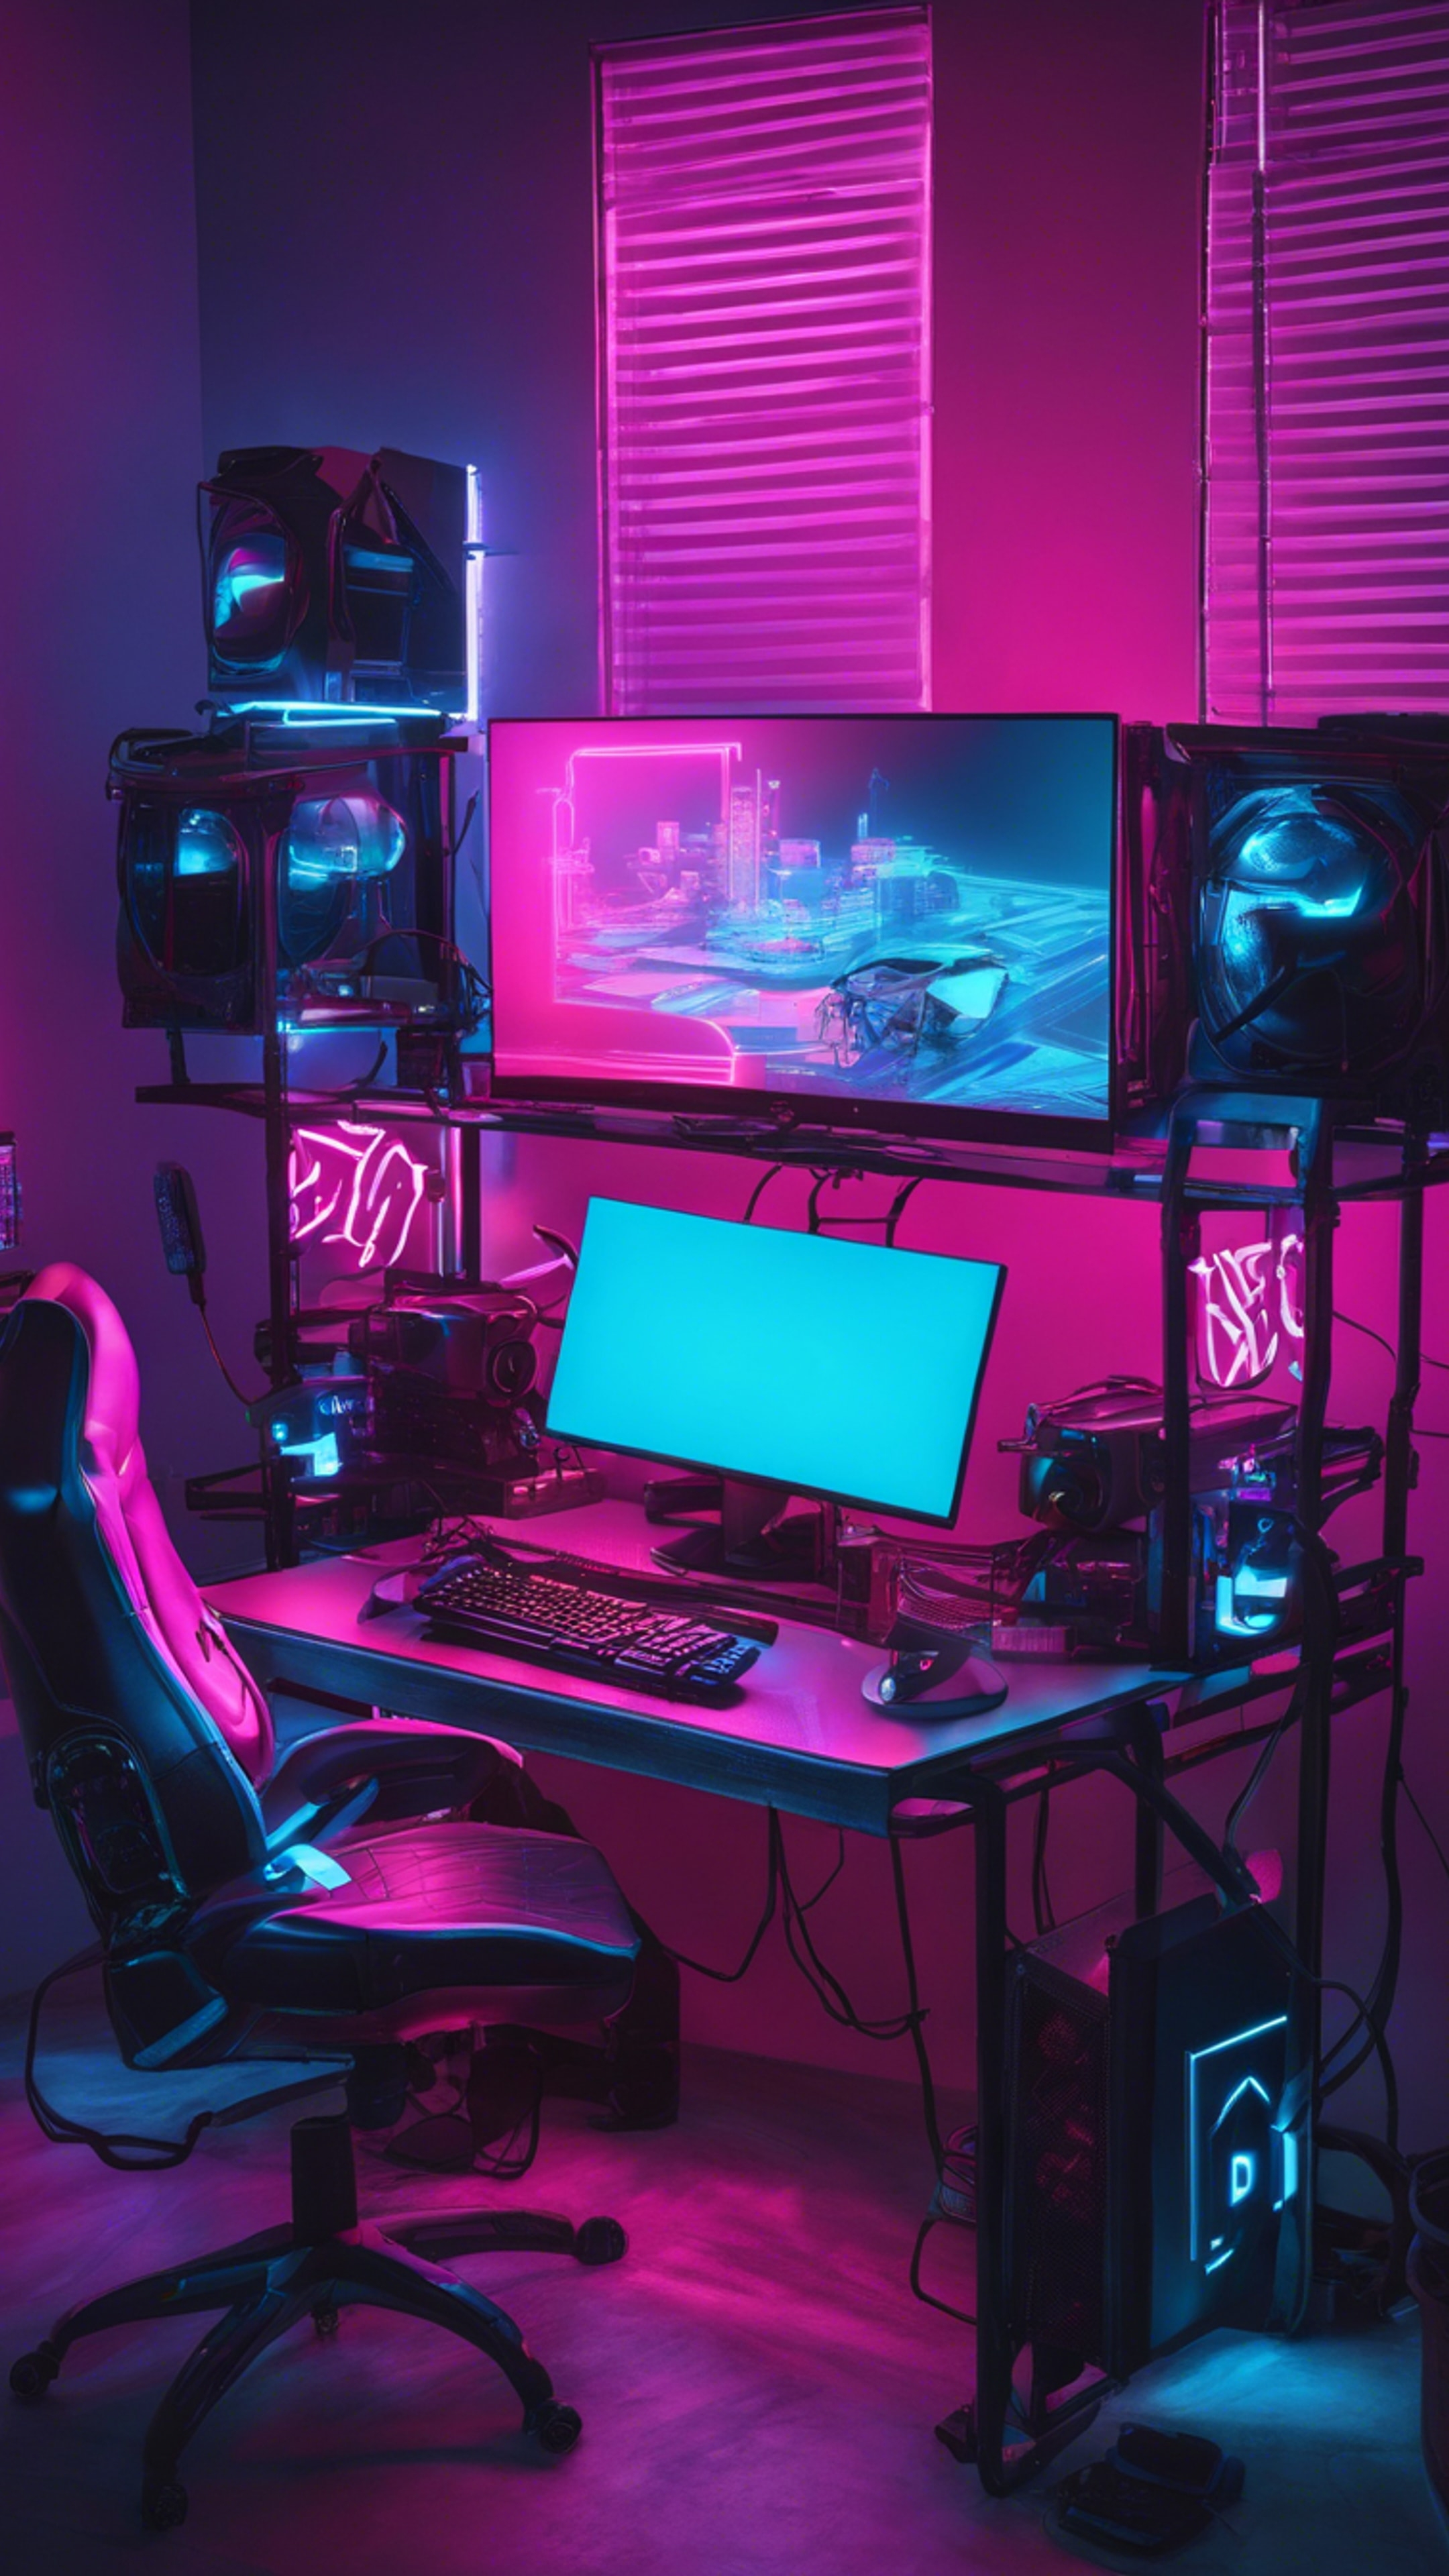 A neon blue gaming setup with a high-end PC, LED keyboard and a gaming monitor. Tapeta[173ea11d79a5456c932c]